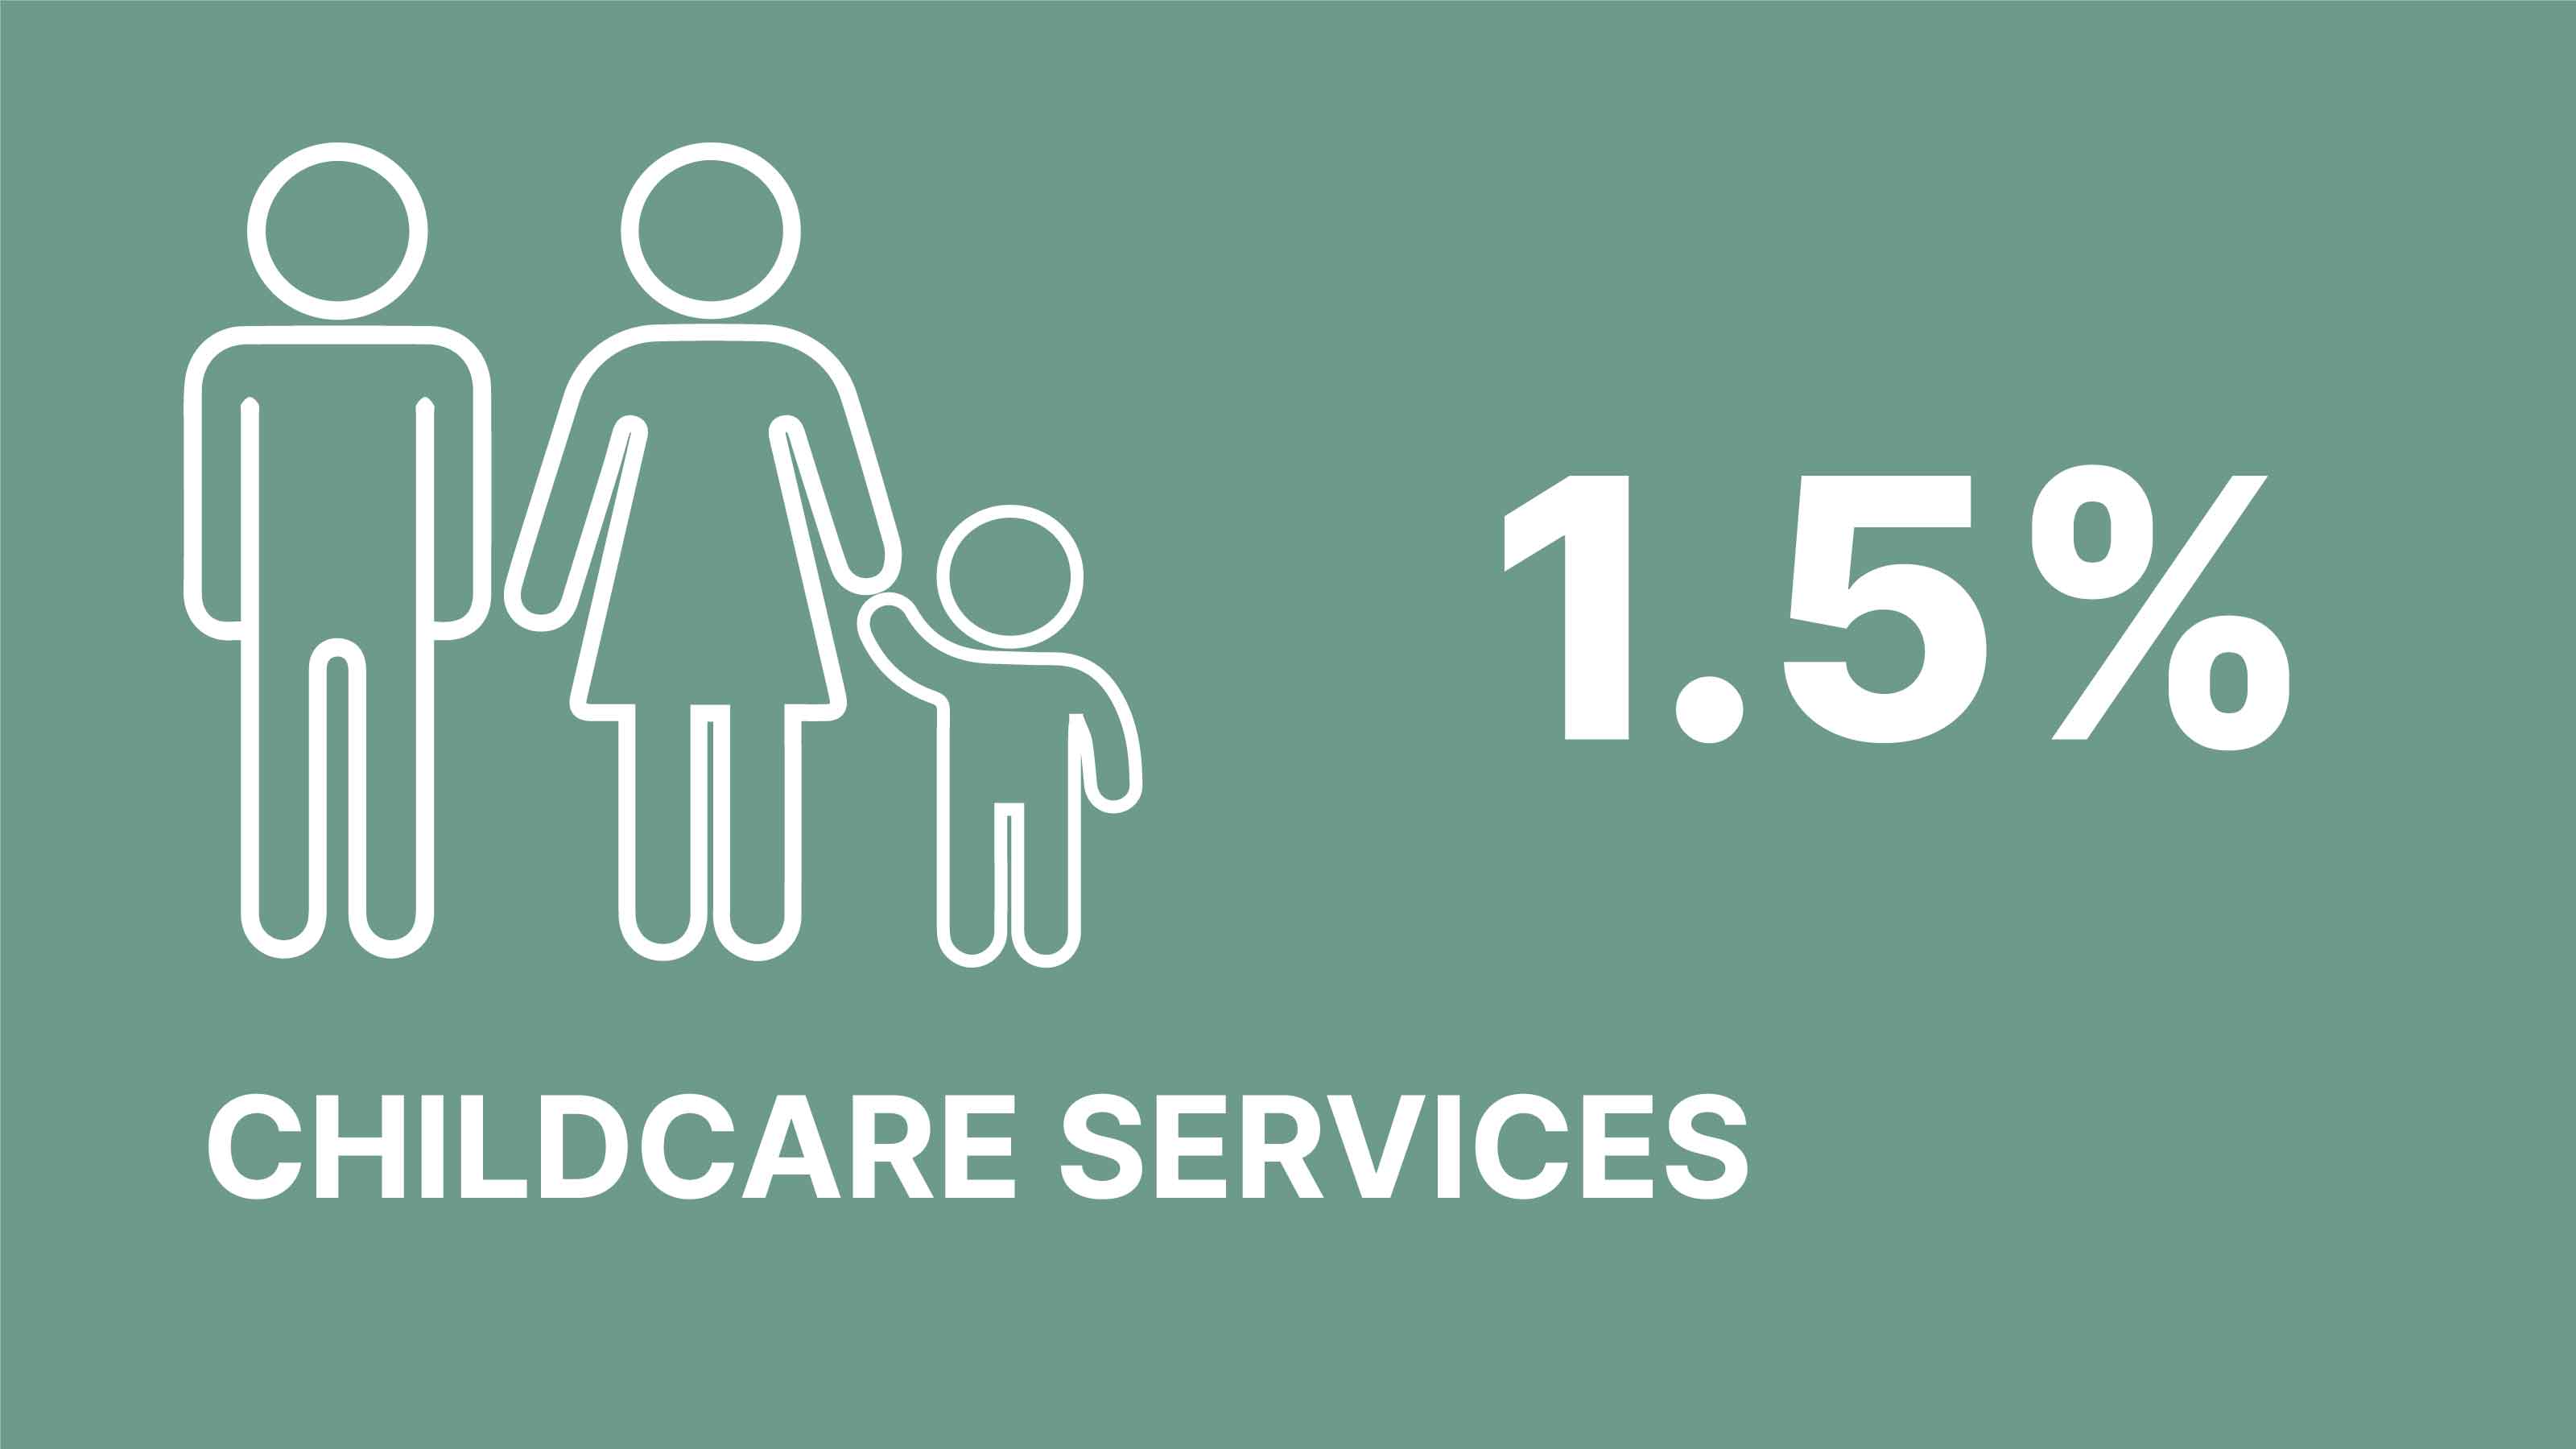 Infographic showing 1.5% of the levy goes to childcare services